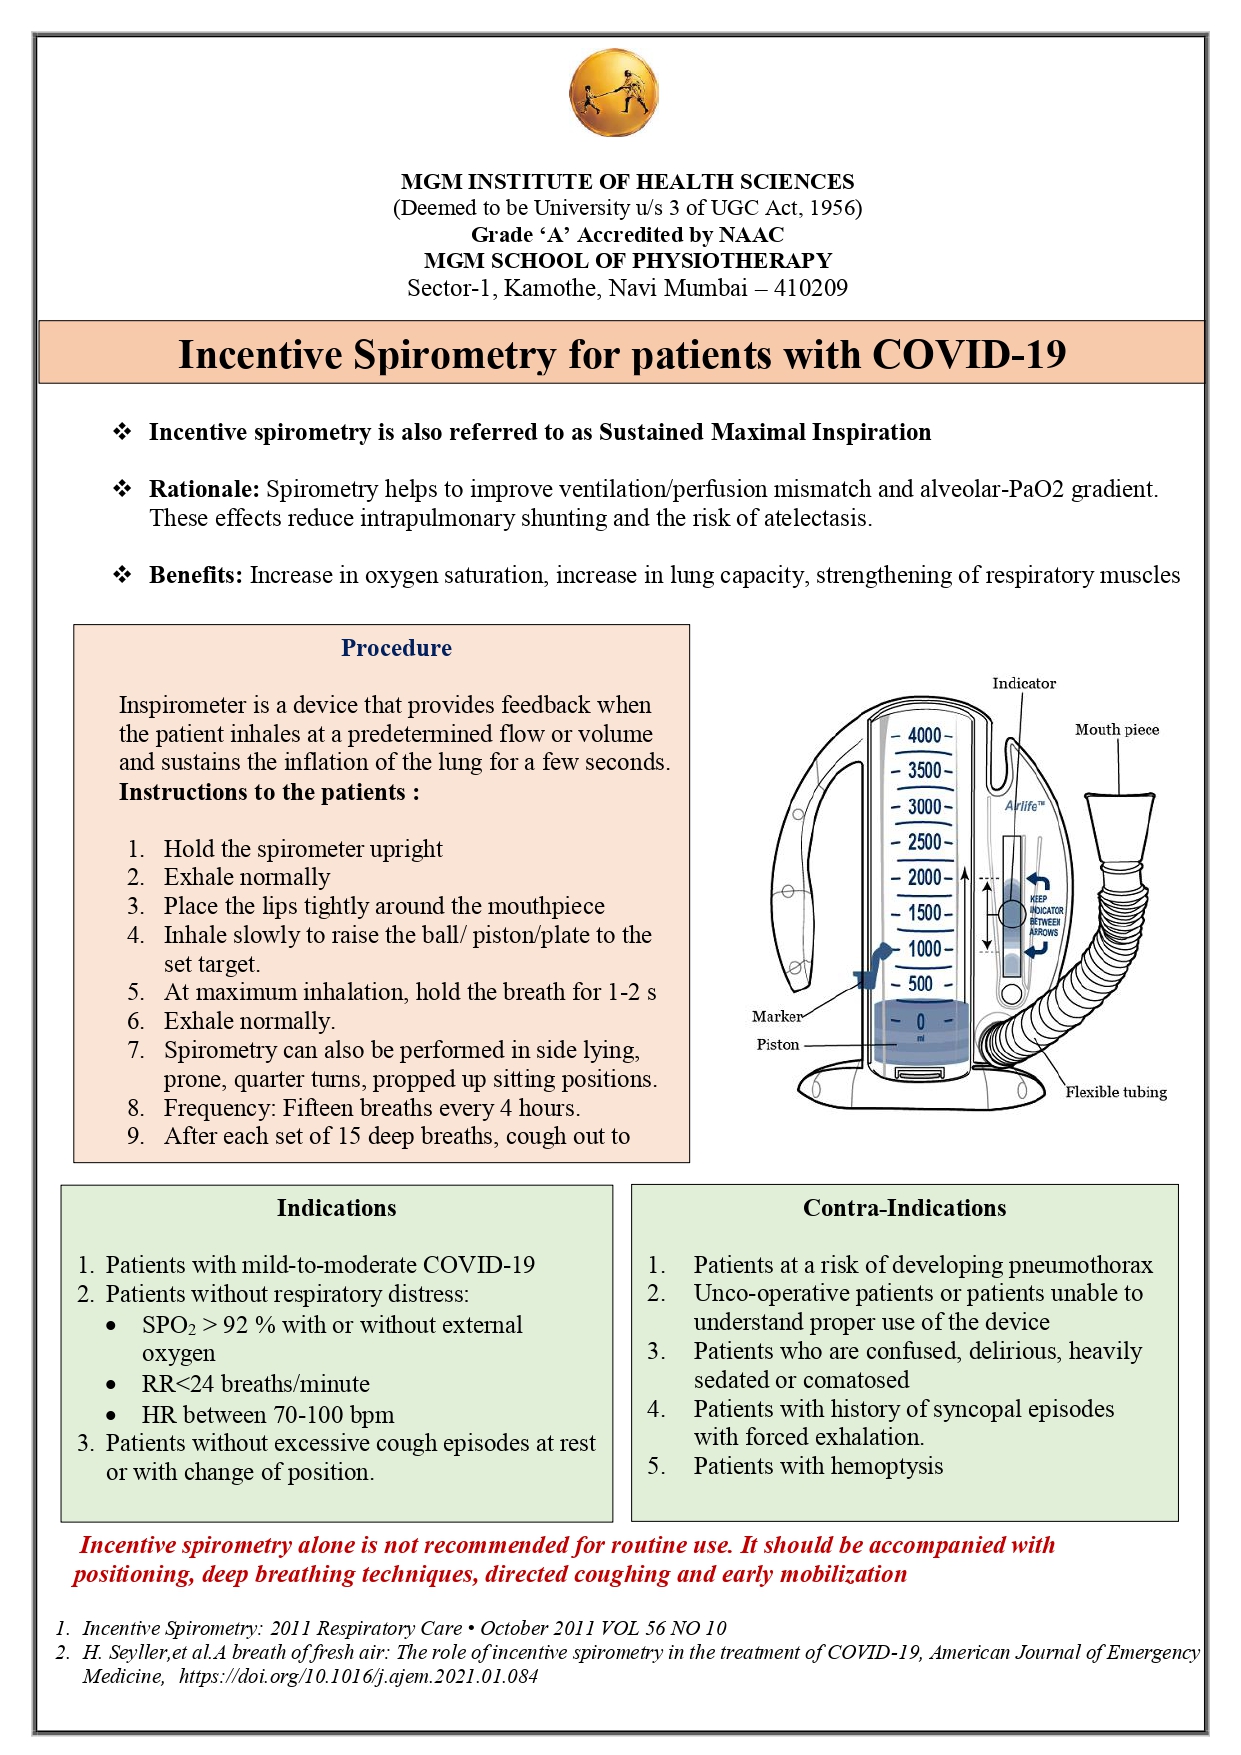 Incentive Spirometer Pamplet for doctors (English)